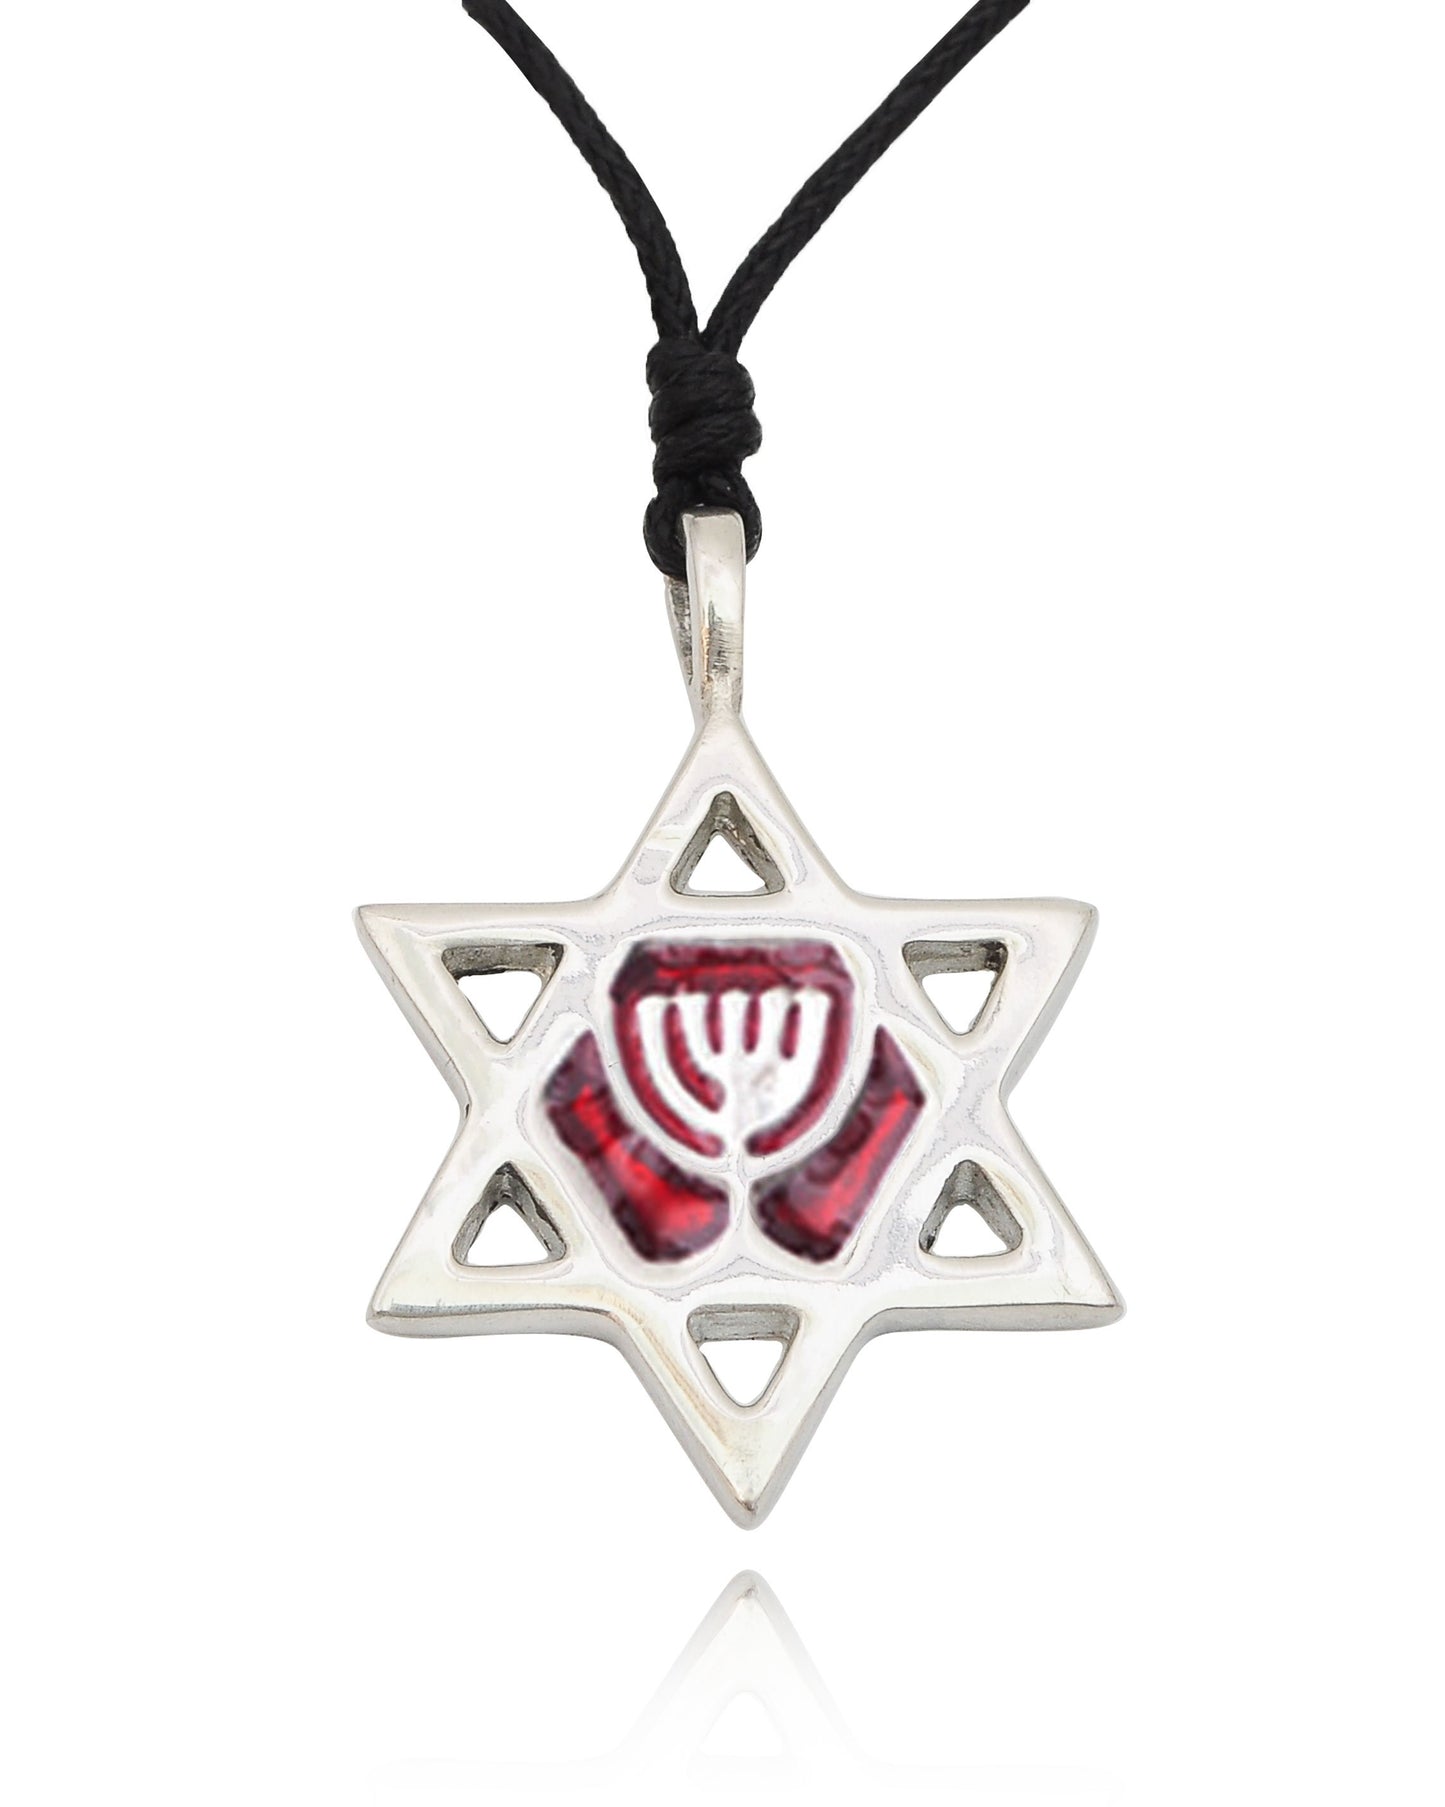 Unique Jewish Star of David Silver Pewter Charm Necklace Pendant Jewelry